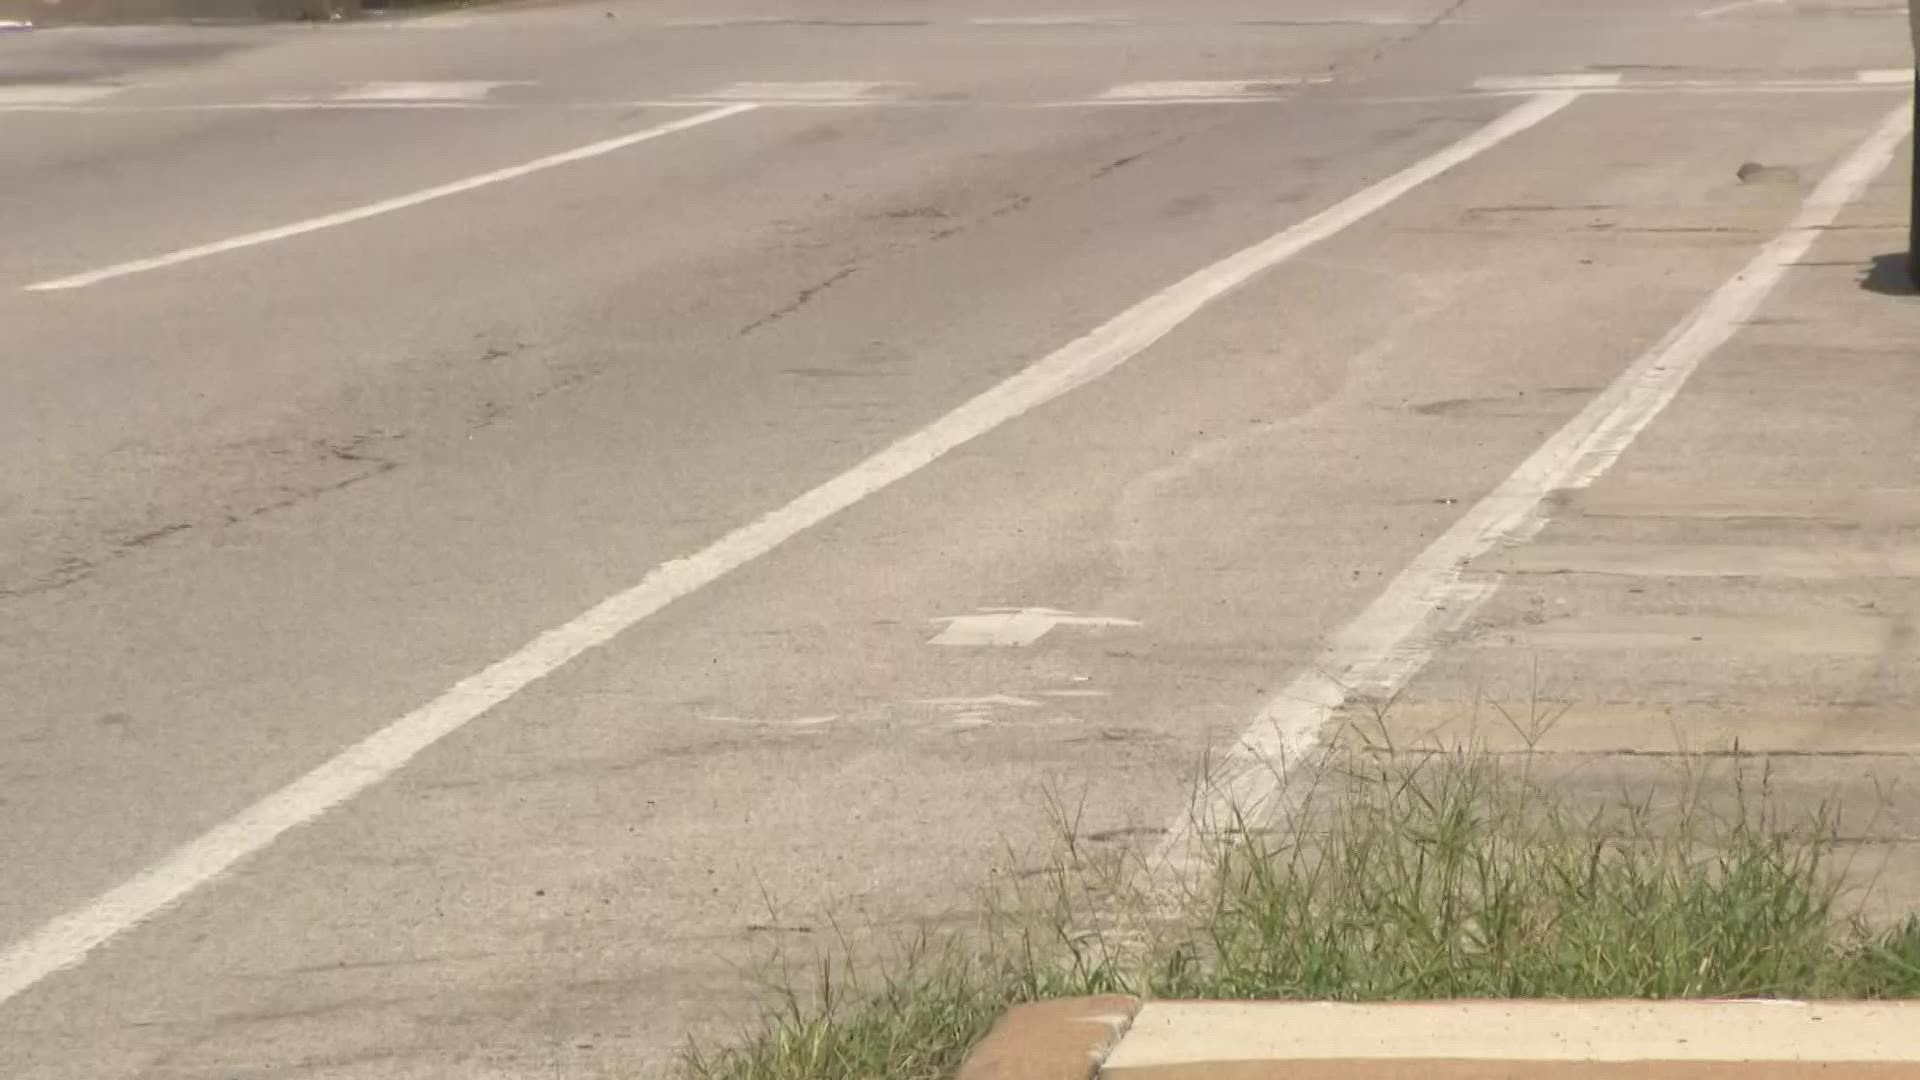 Some from the biking community expressed concern about the issue and laid out ideas for safer infrastructure. A biker died on Tuesday after a hit-and-run crash.